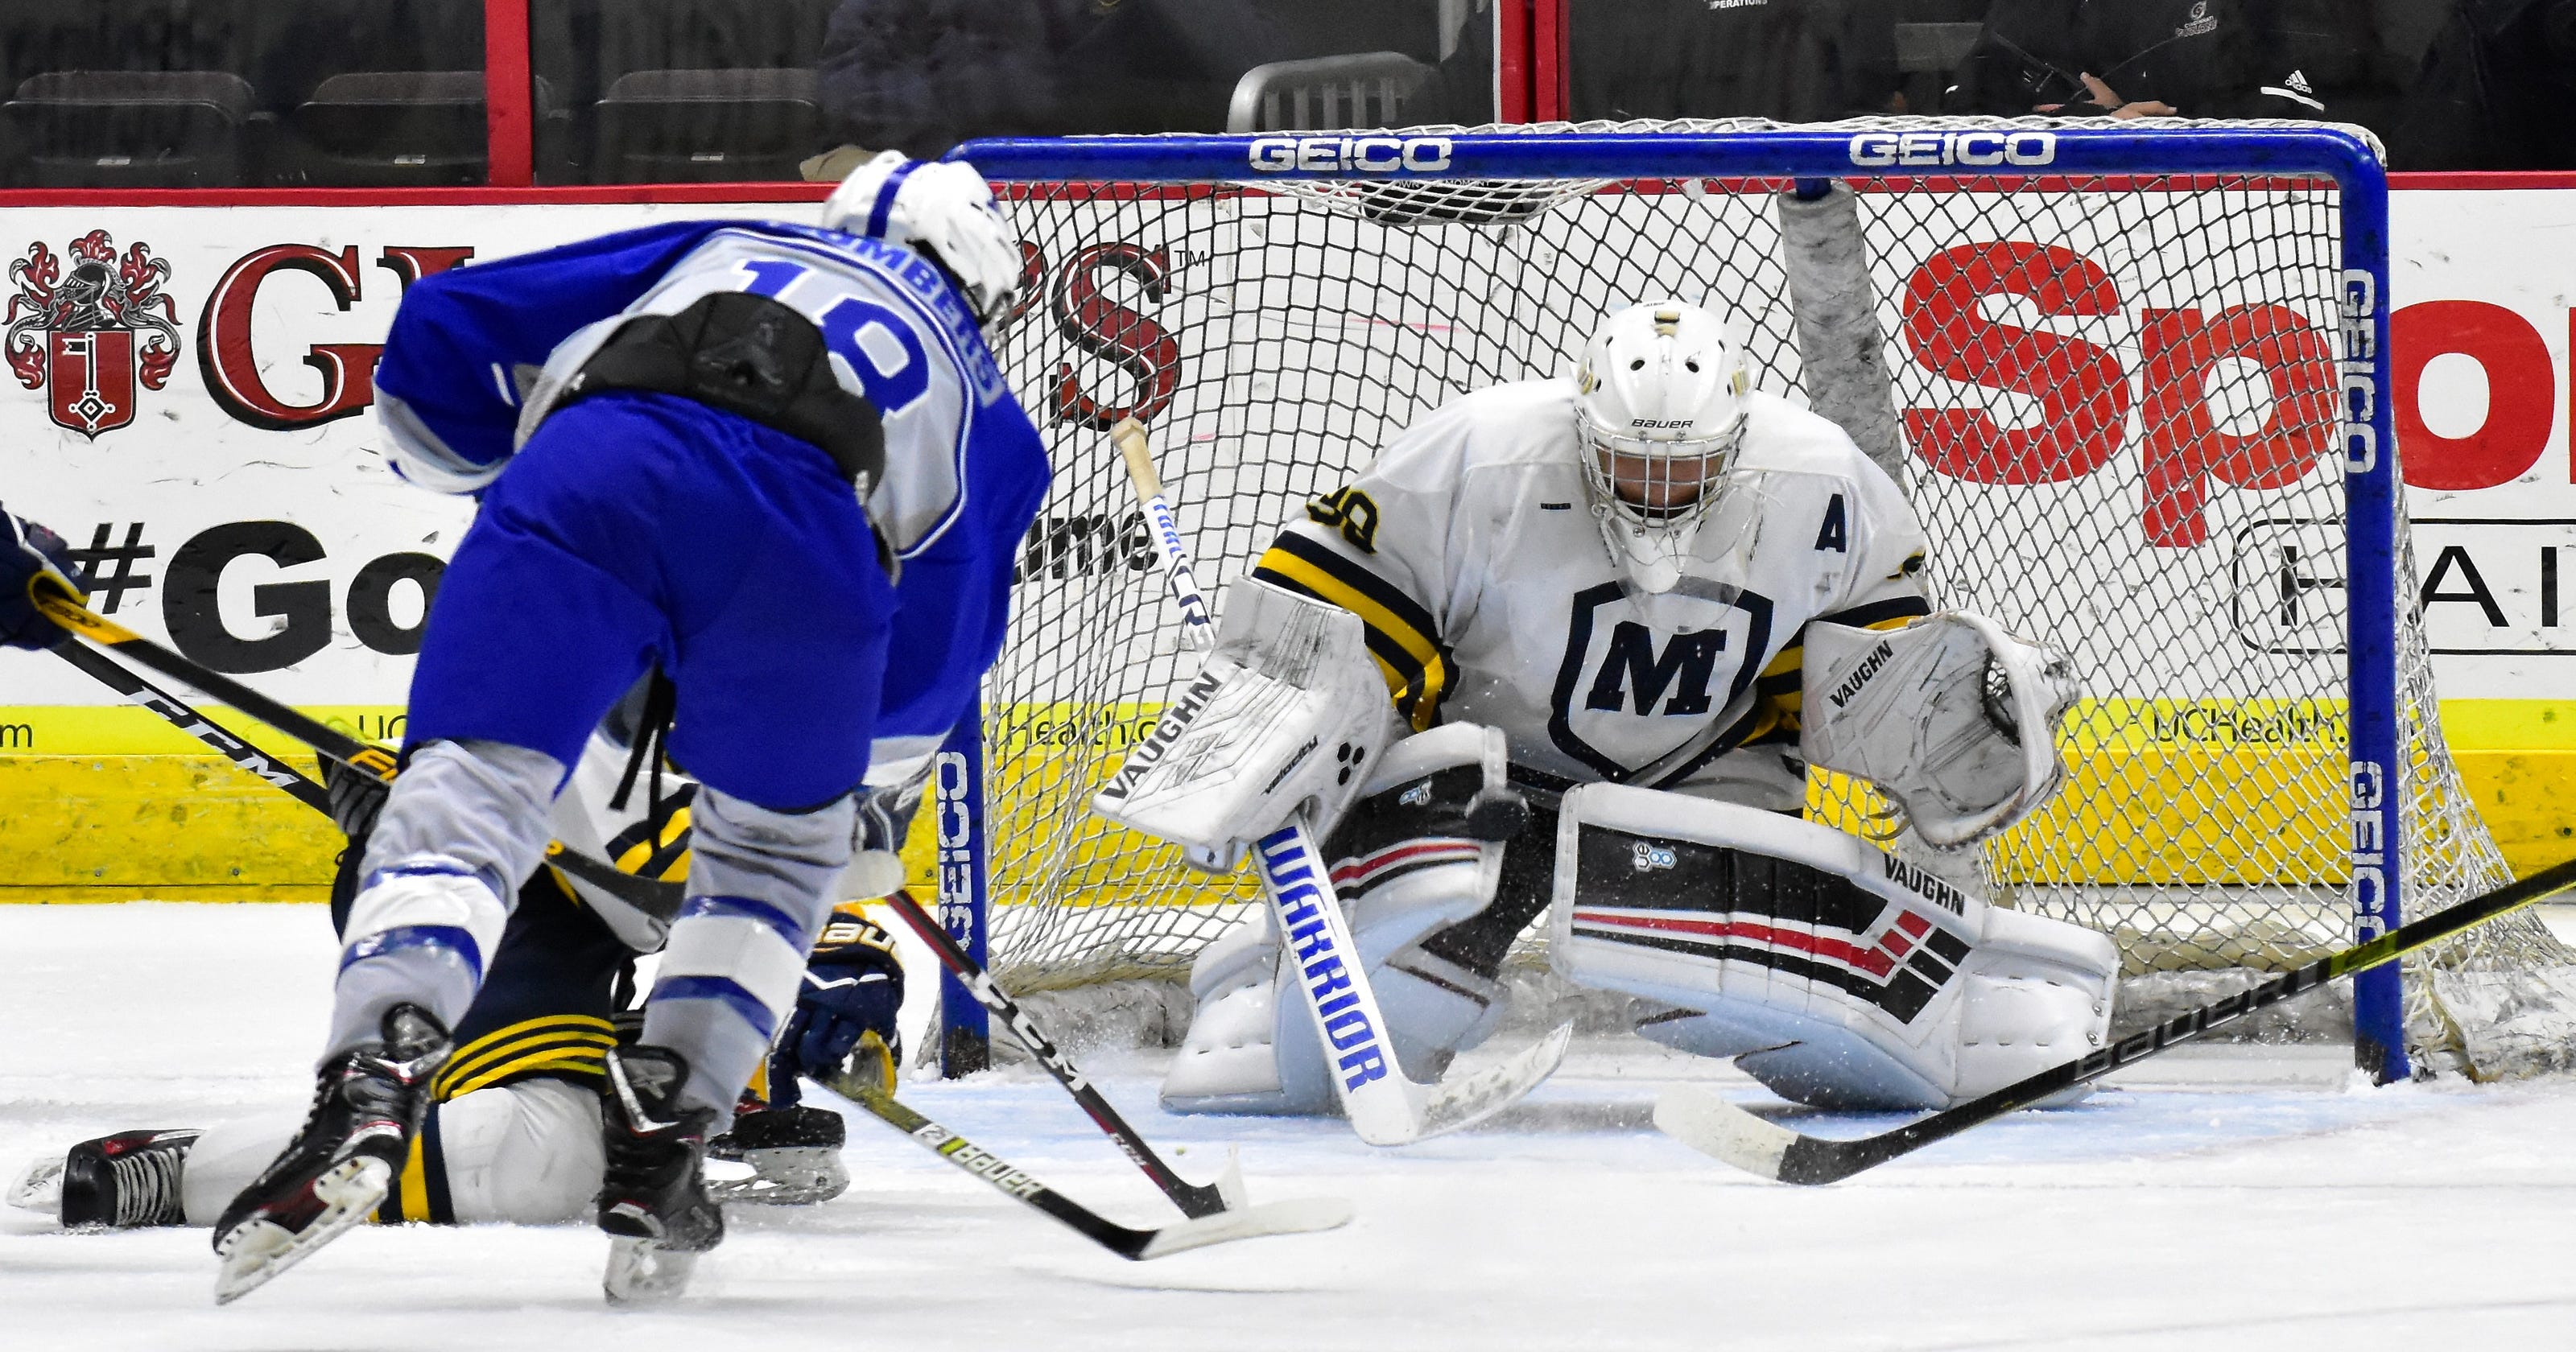 Five storylines to watch for the OHSAA ice hockey tournament